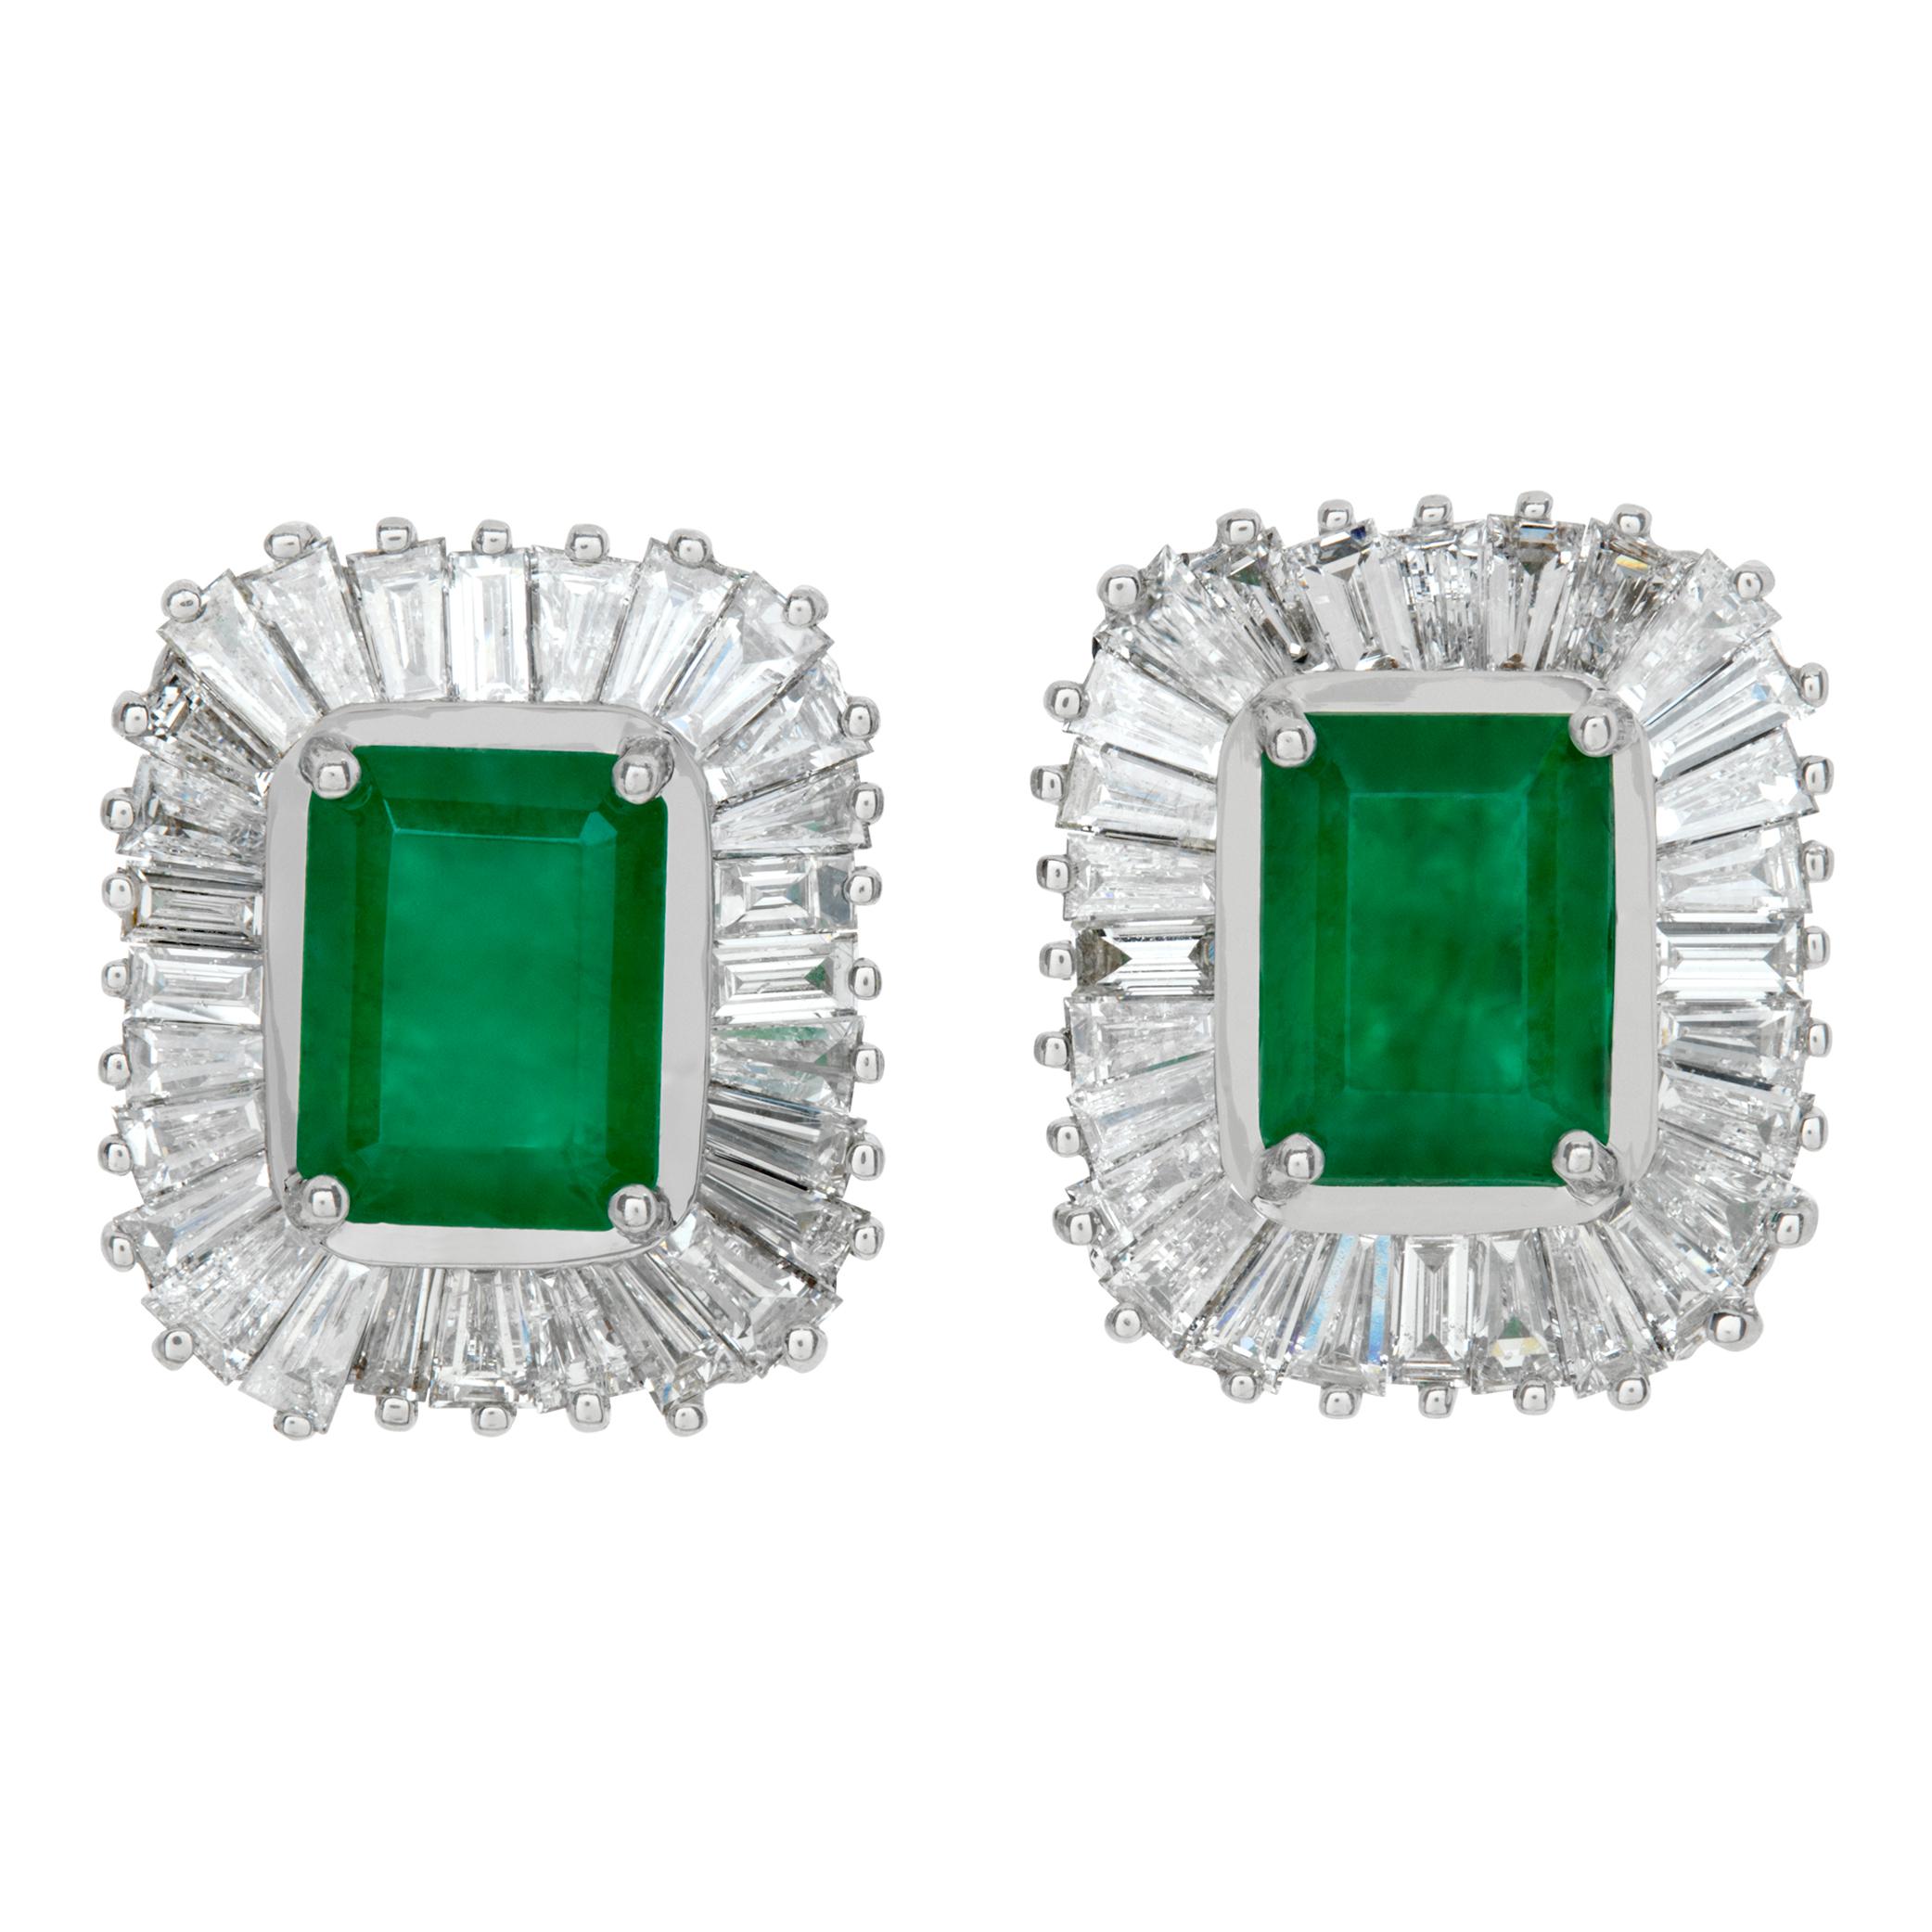 White gold emerald and diamond stud earrings